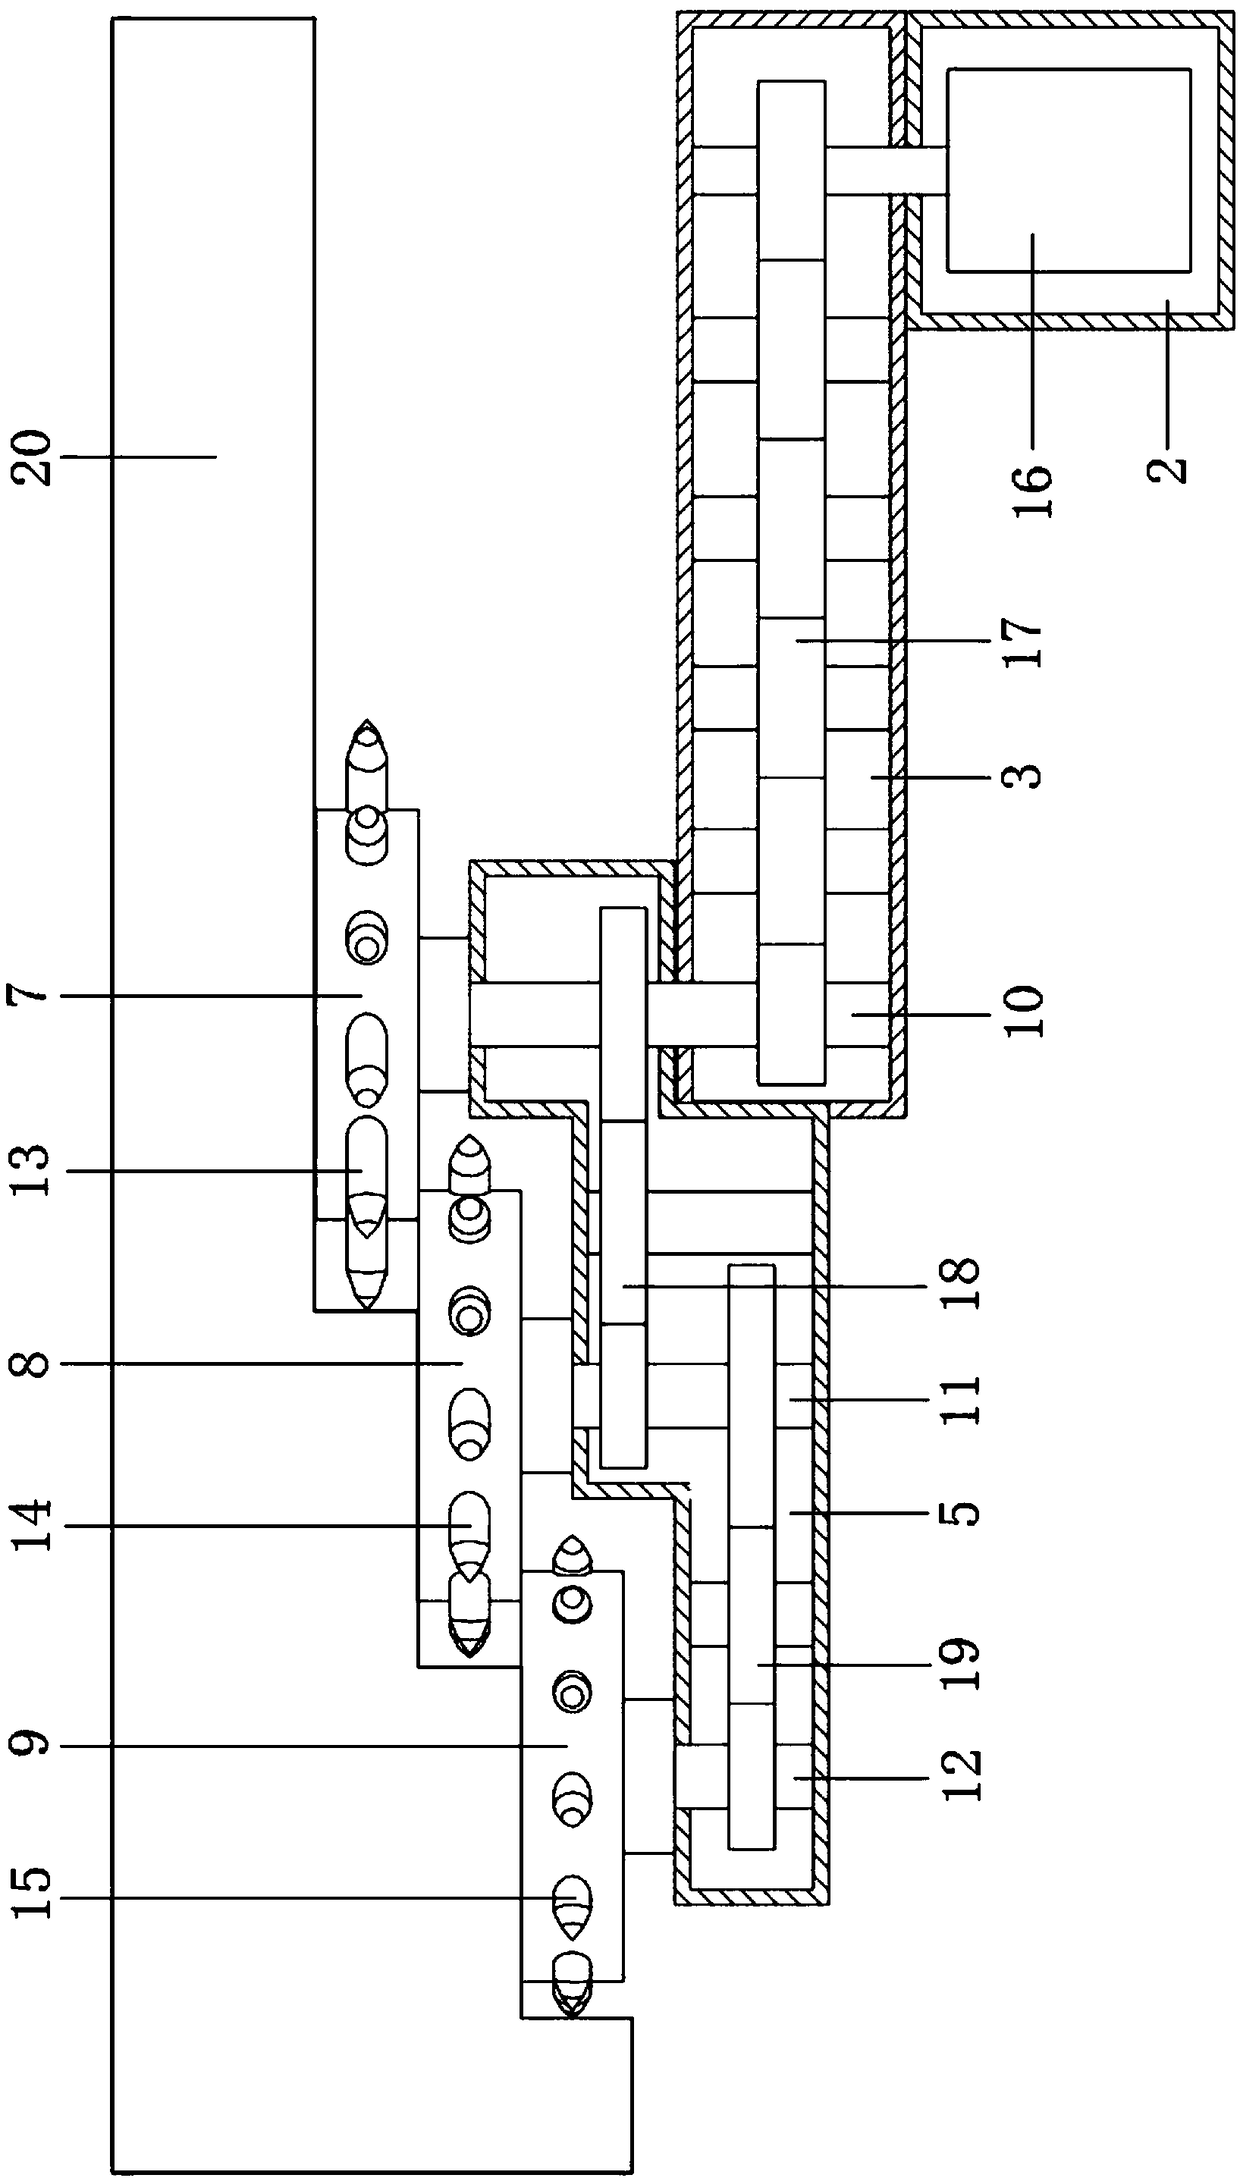 Graded propelling type efficient coal mining machine cutting device and method